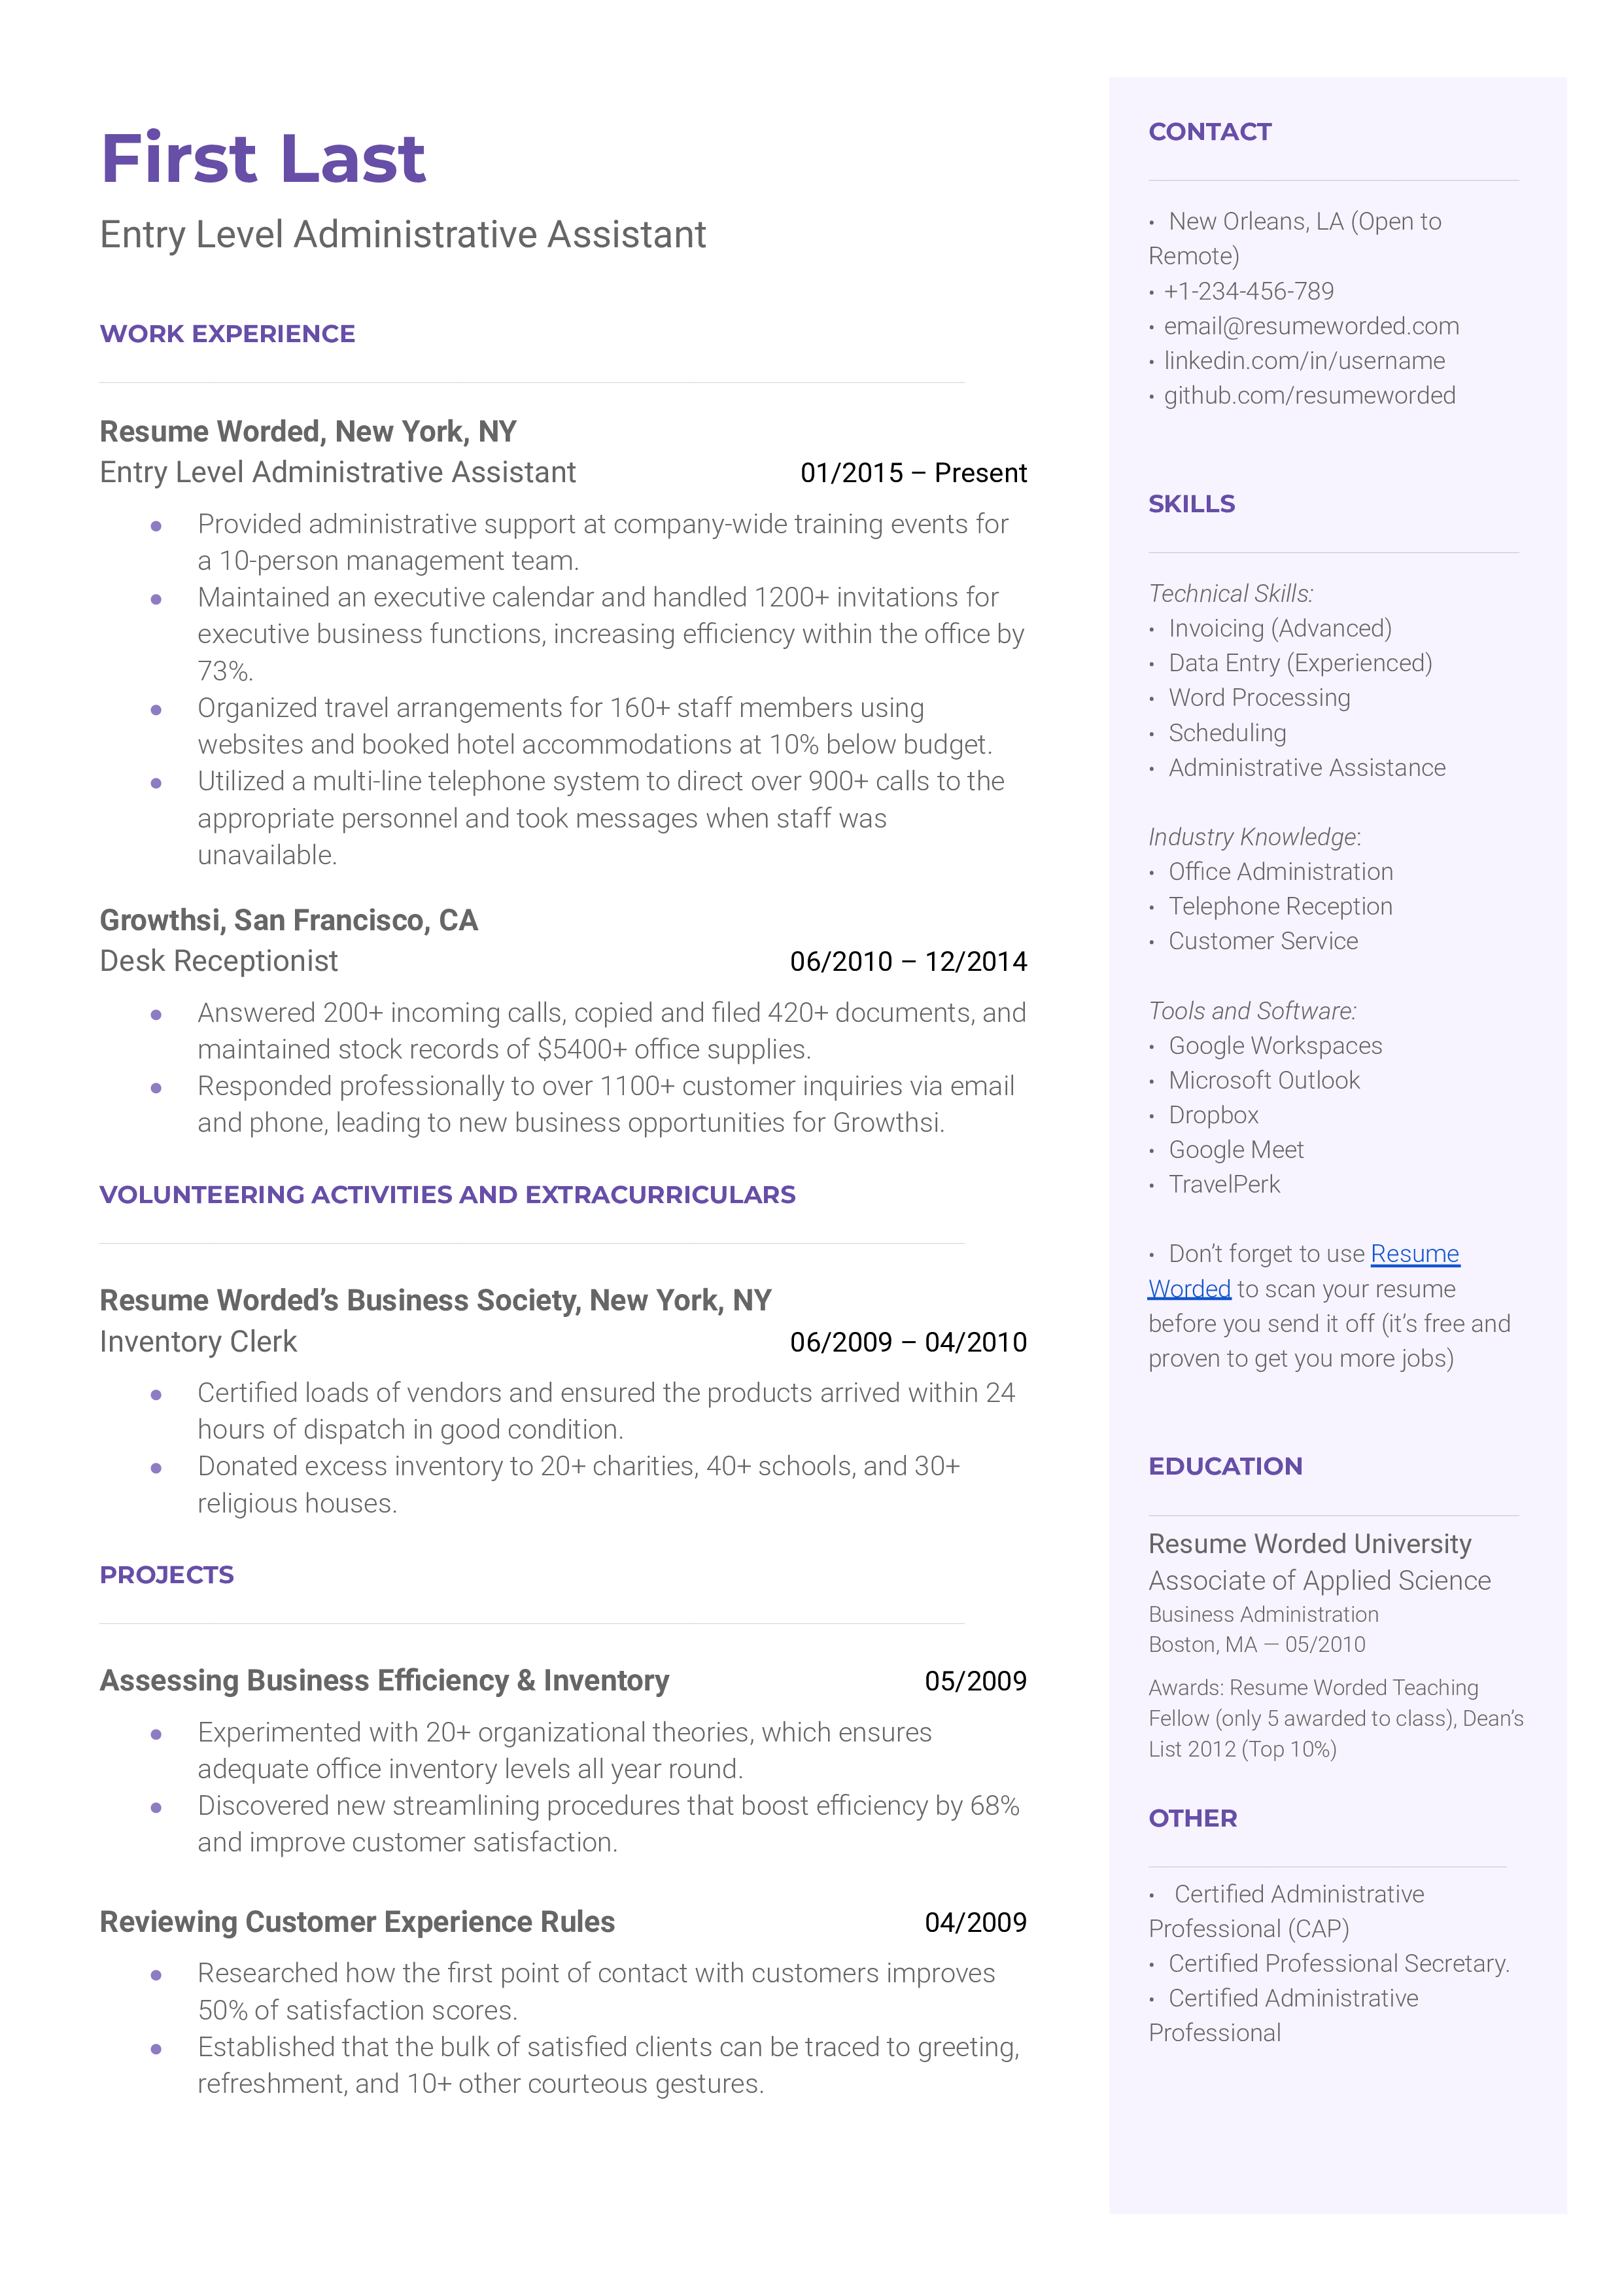 A resume for an entry level adminstrative assistant with a bachelor's degree and experience as an office assistant.